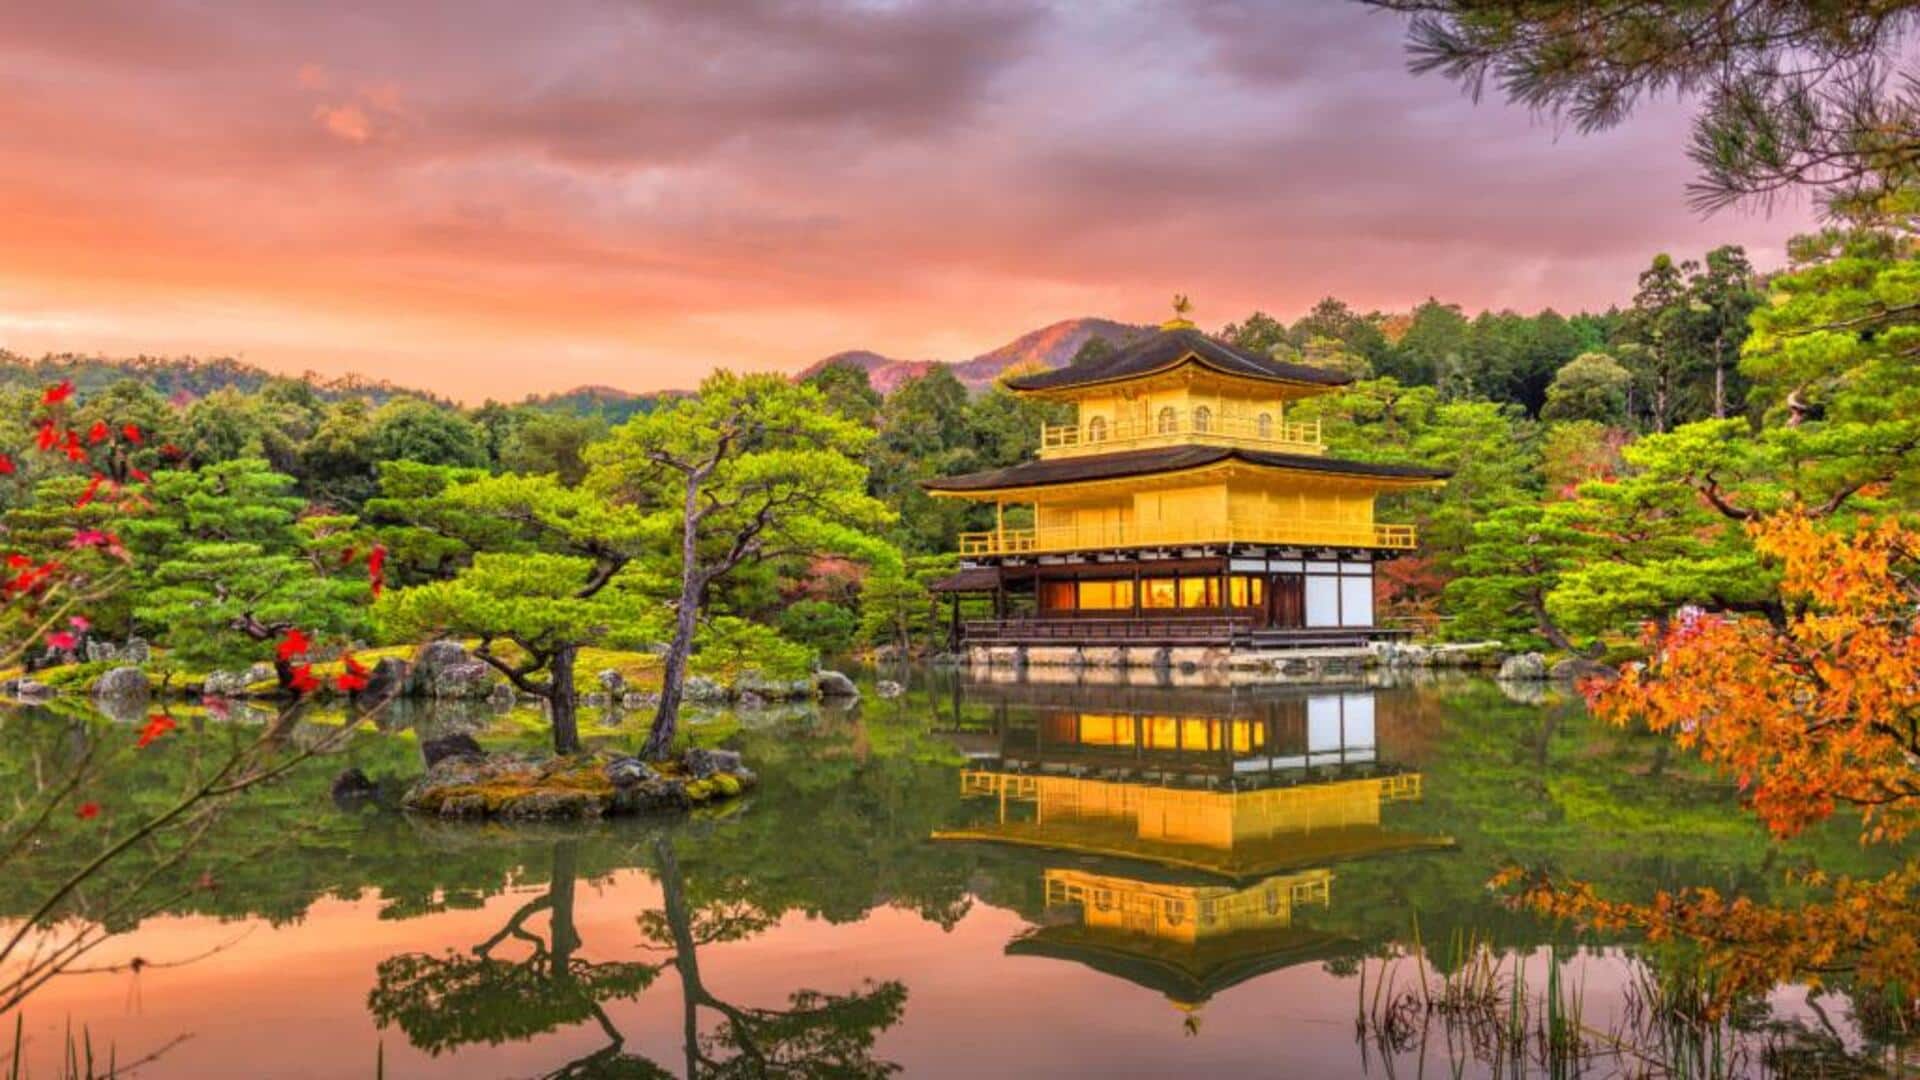 Explore Kyoto's timeless cultural journey with this things-to-do guide